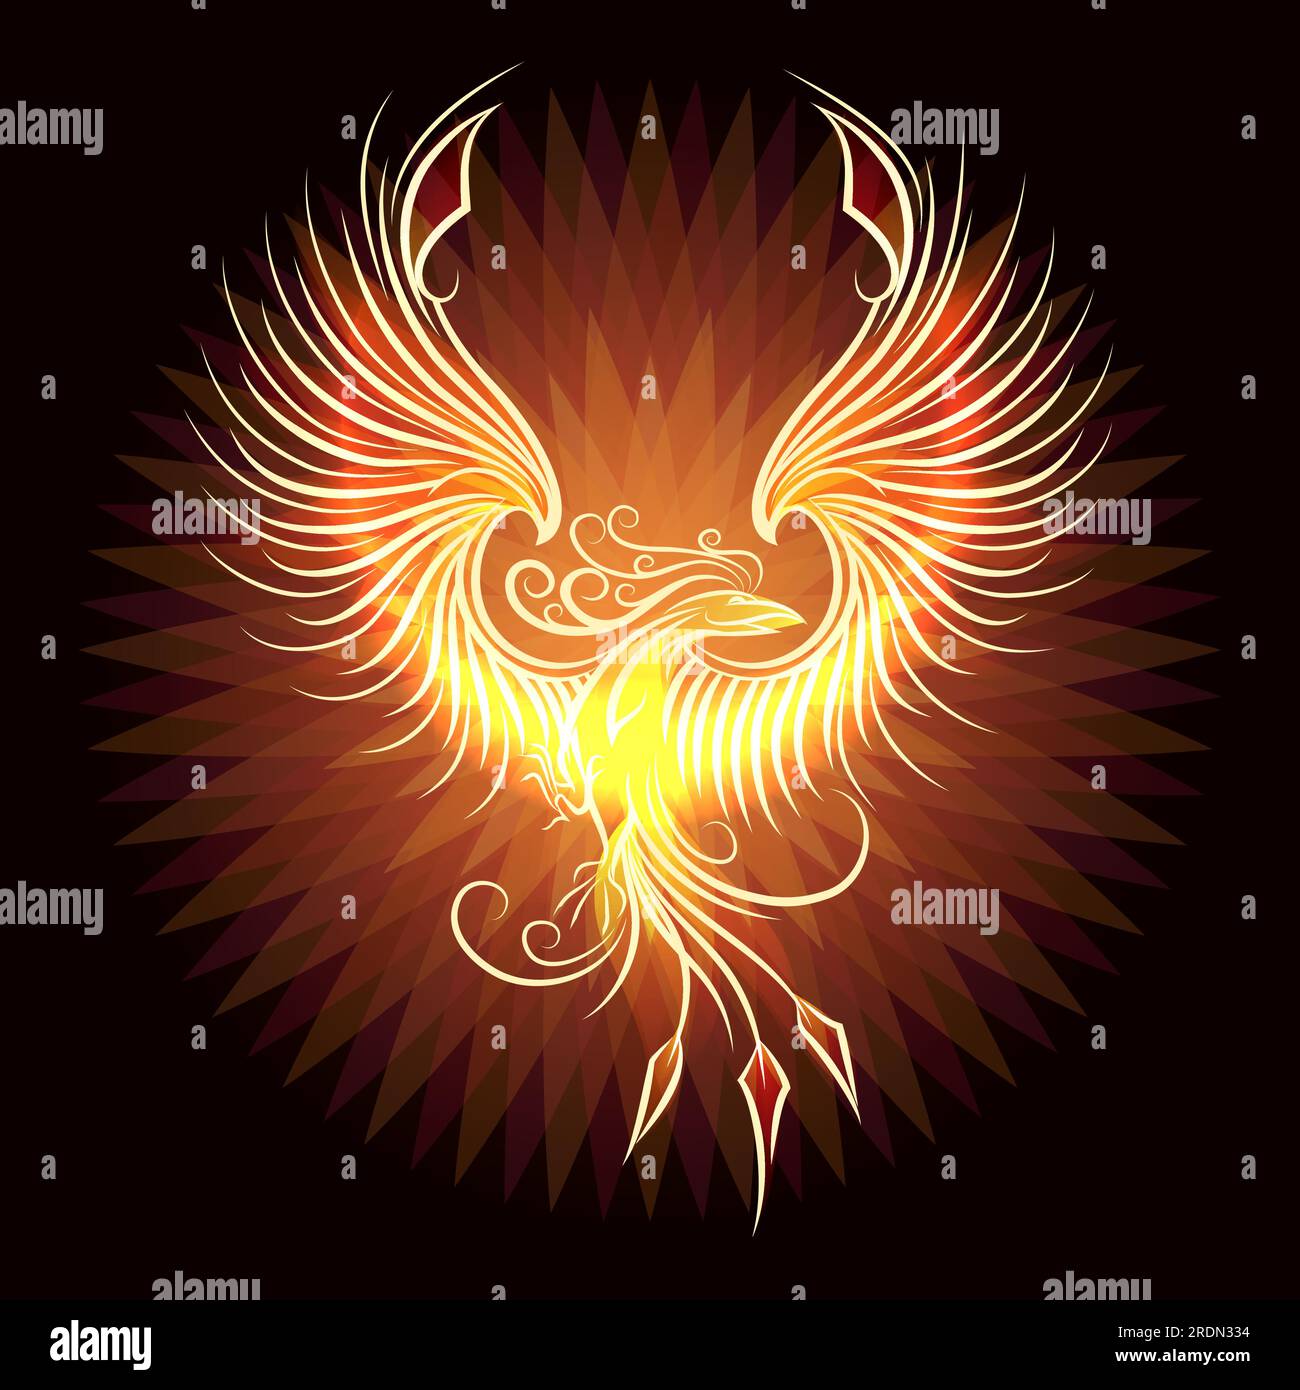 Fire Burning Phoenix Bird rising from ashes on Black Background. Vector illustration Stock Vector